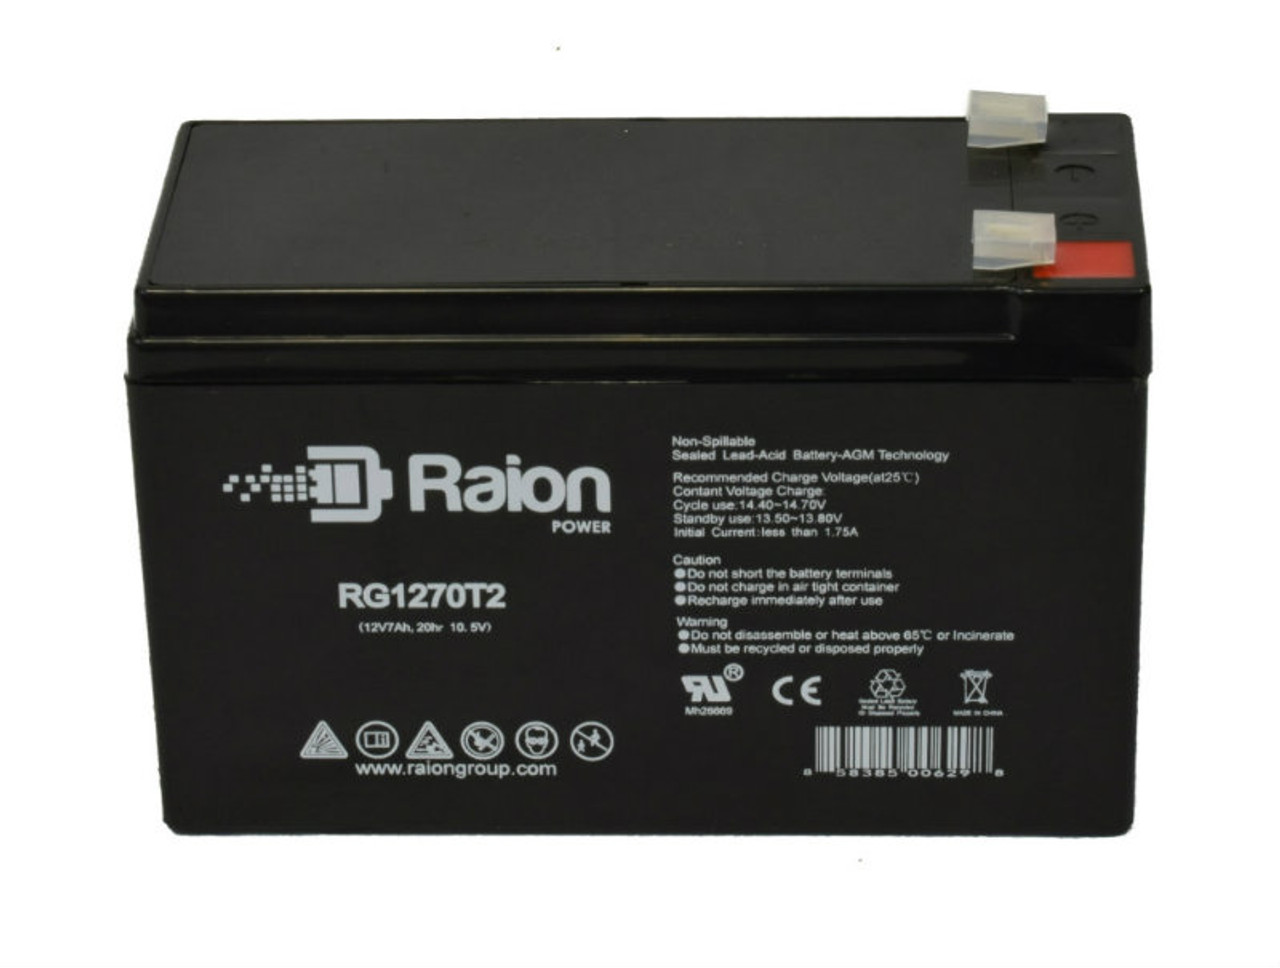 Raion Power RG1270T2 12V 7Ah Lead Acid Battery for Ultra Products ULT31502 Lawn Mower